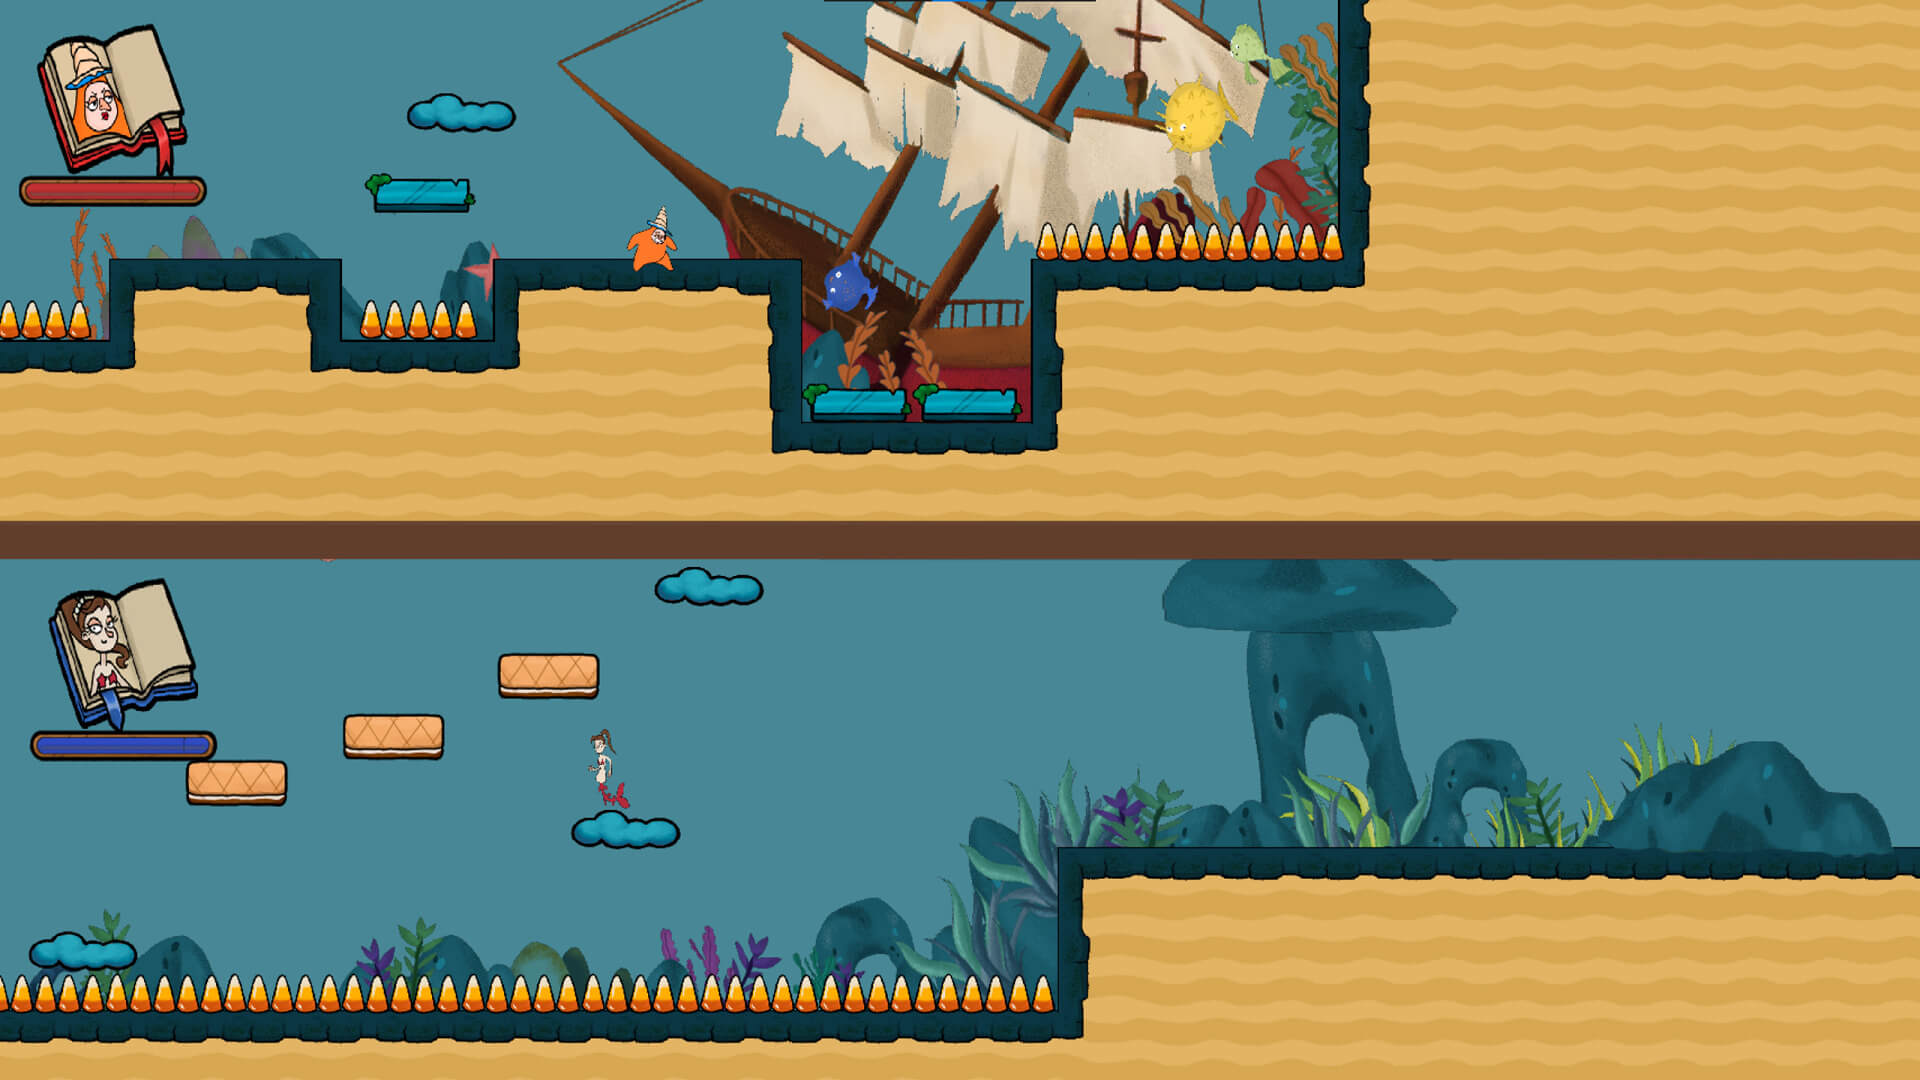 Two players race to get the magic potion, each advancing at their own pace in an underwater world filled with seaweed, rocks, and even a sunken ship.